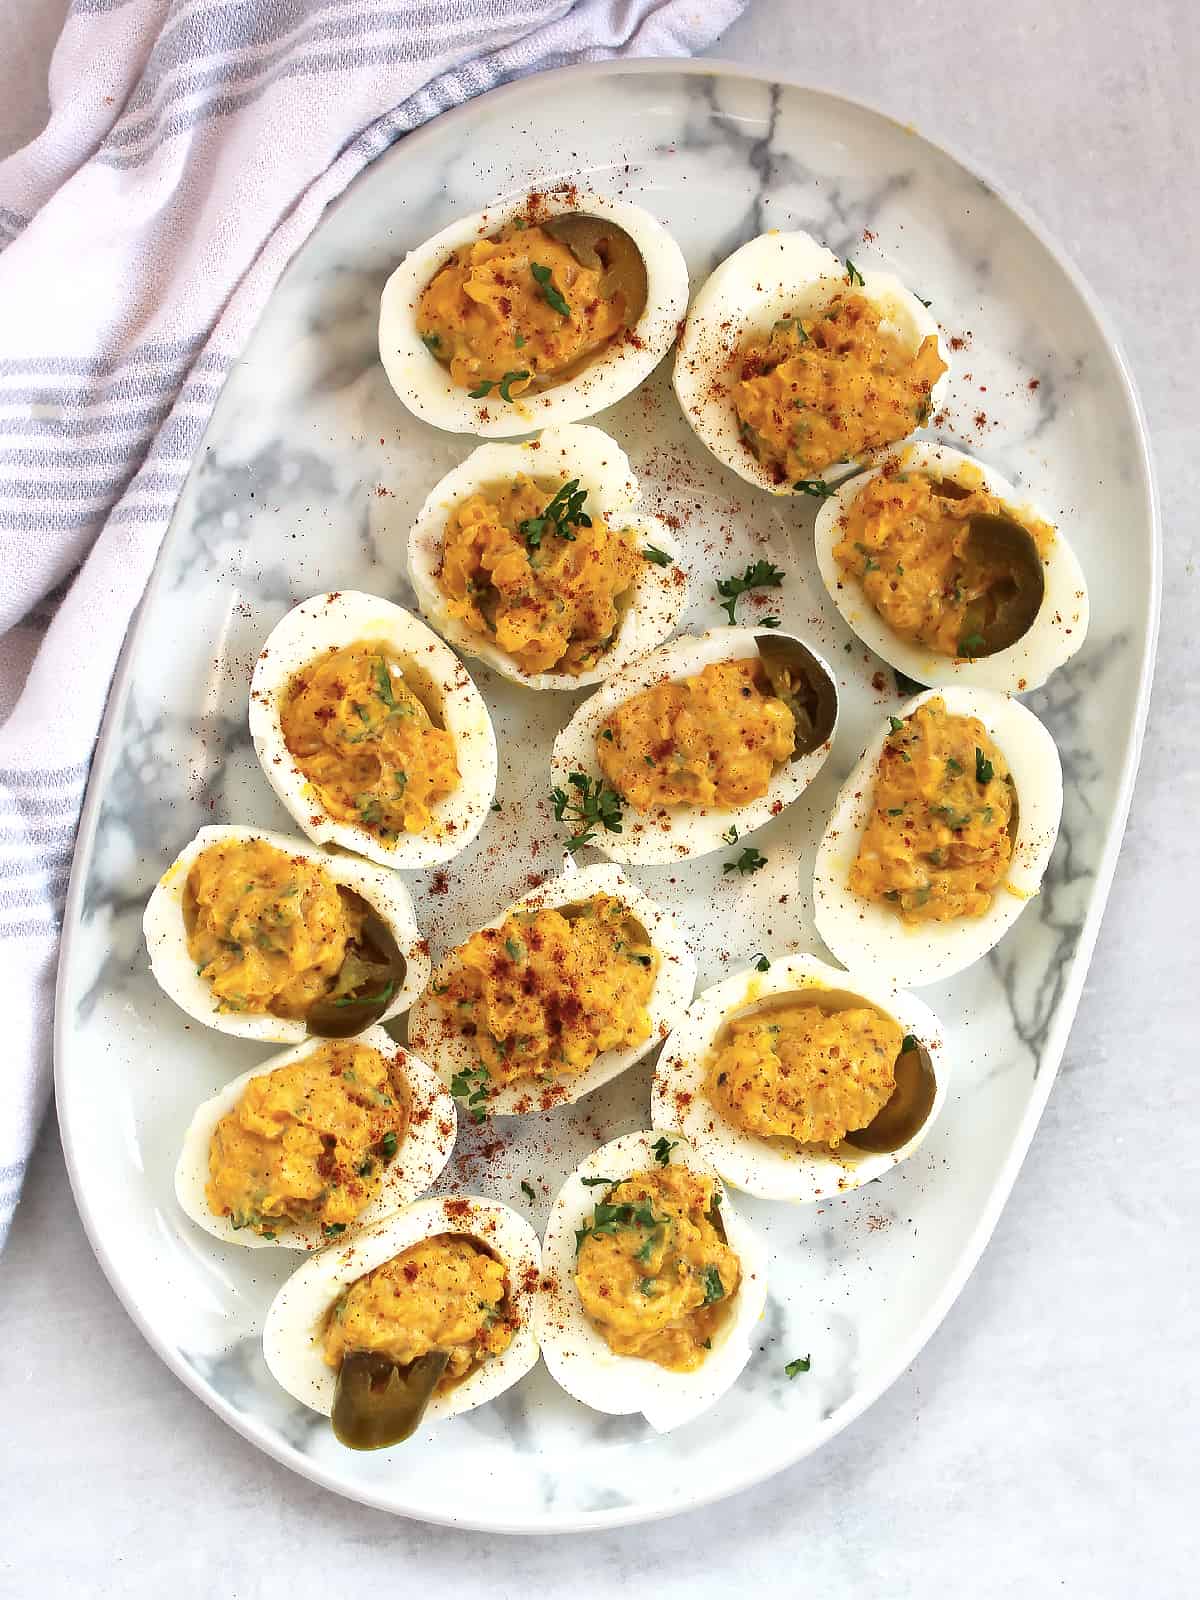 Mexican taco deviled eggs on a serving plate garnished with jalapeno and cilantro.